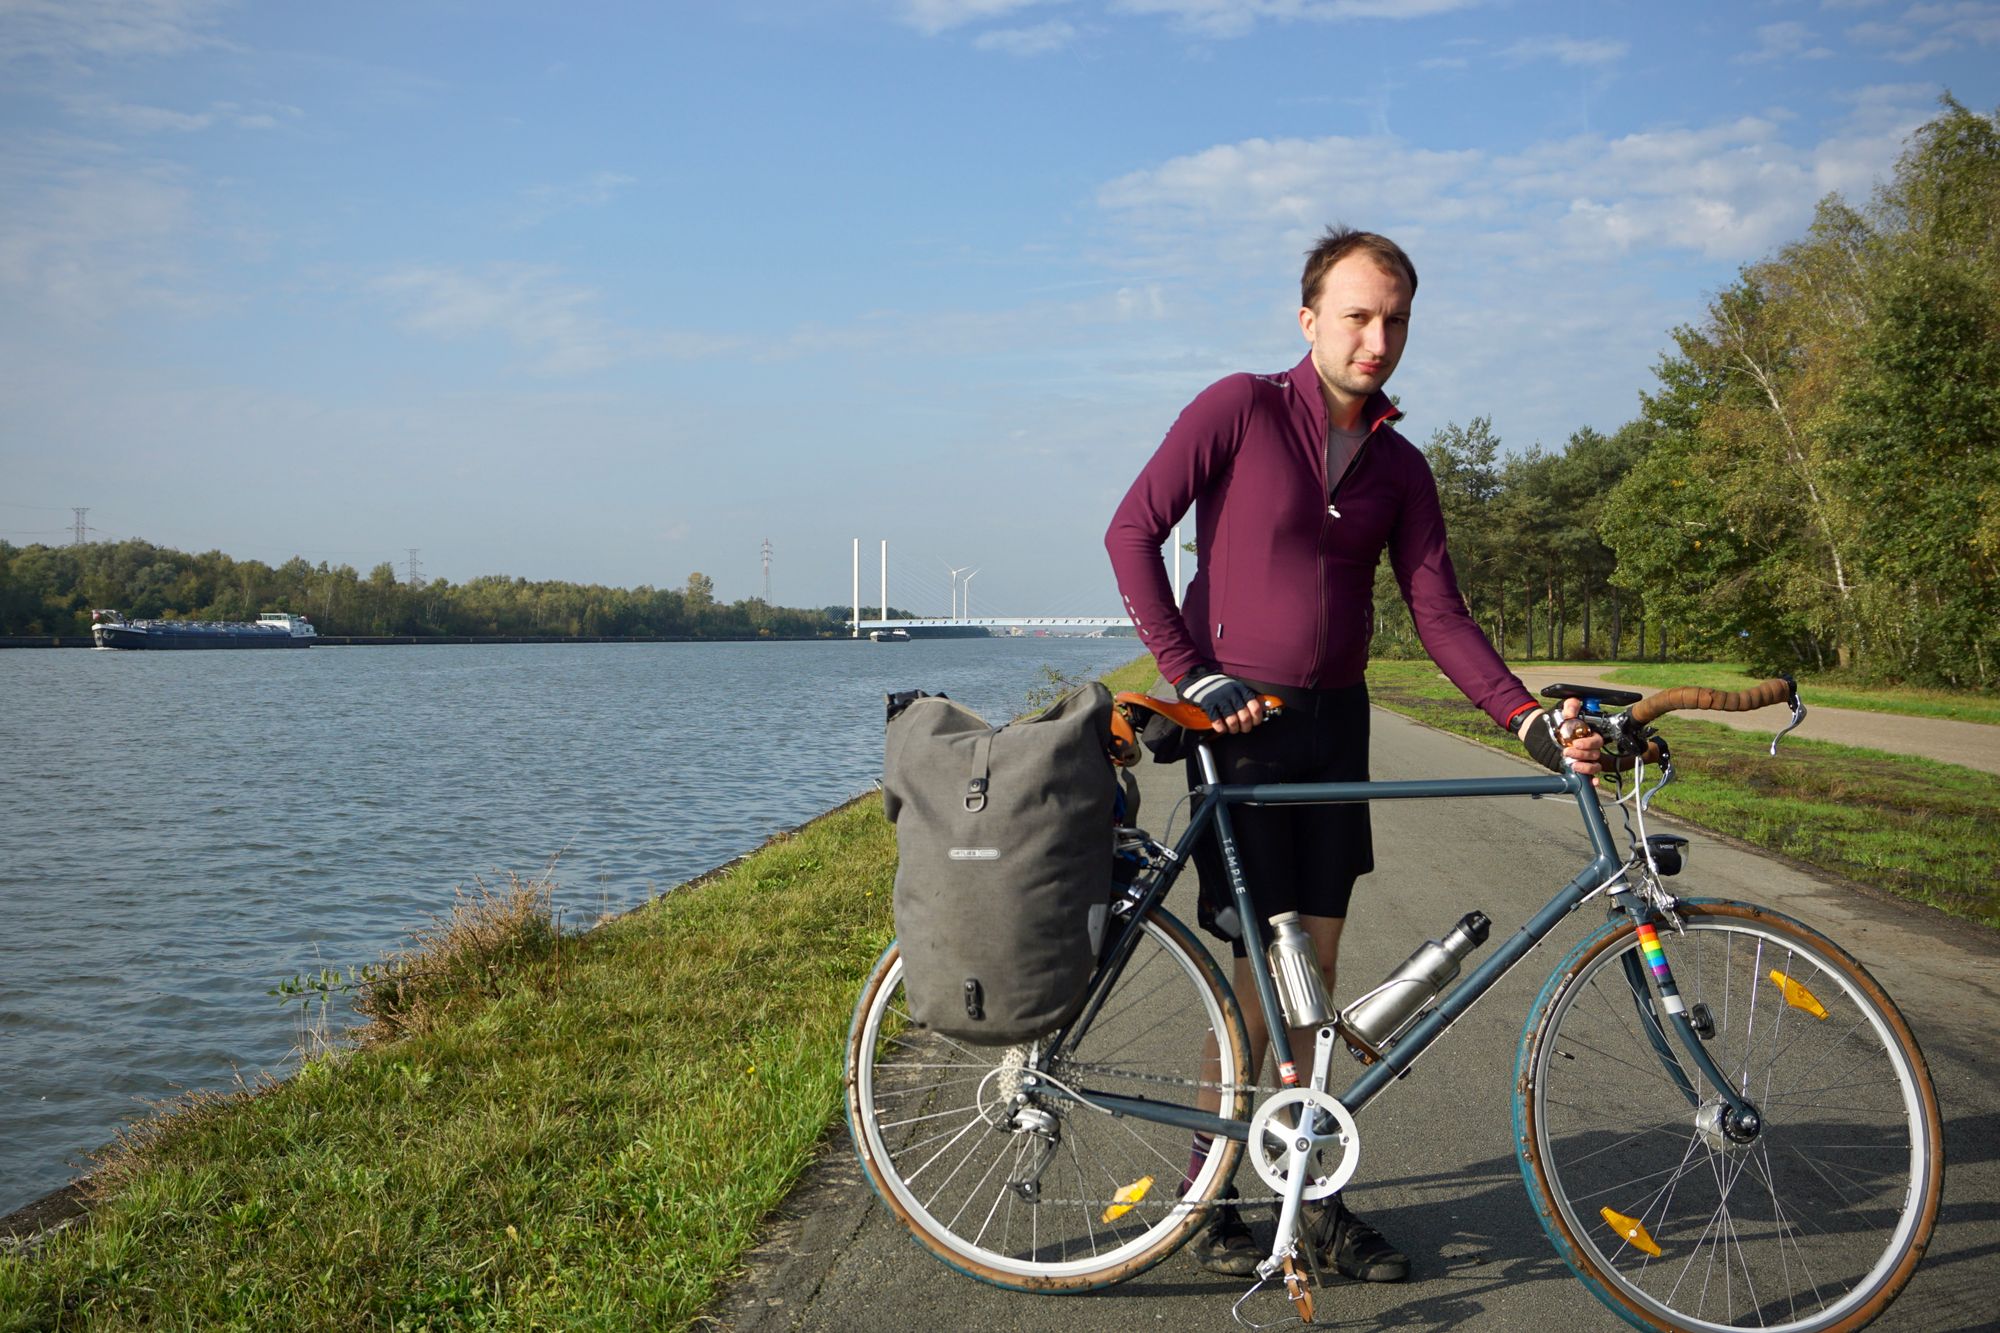 Jonathan stands with his bike on the towpath of a wide canal. The tyres are muddy.